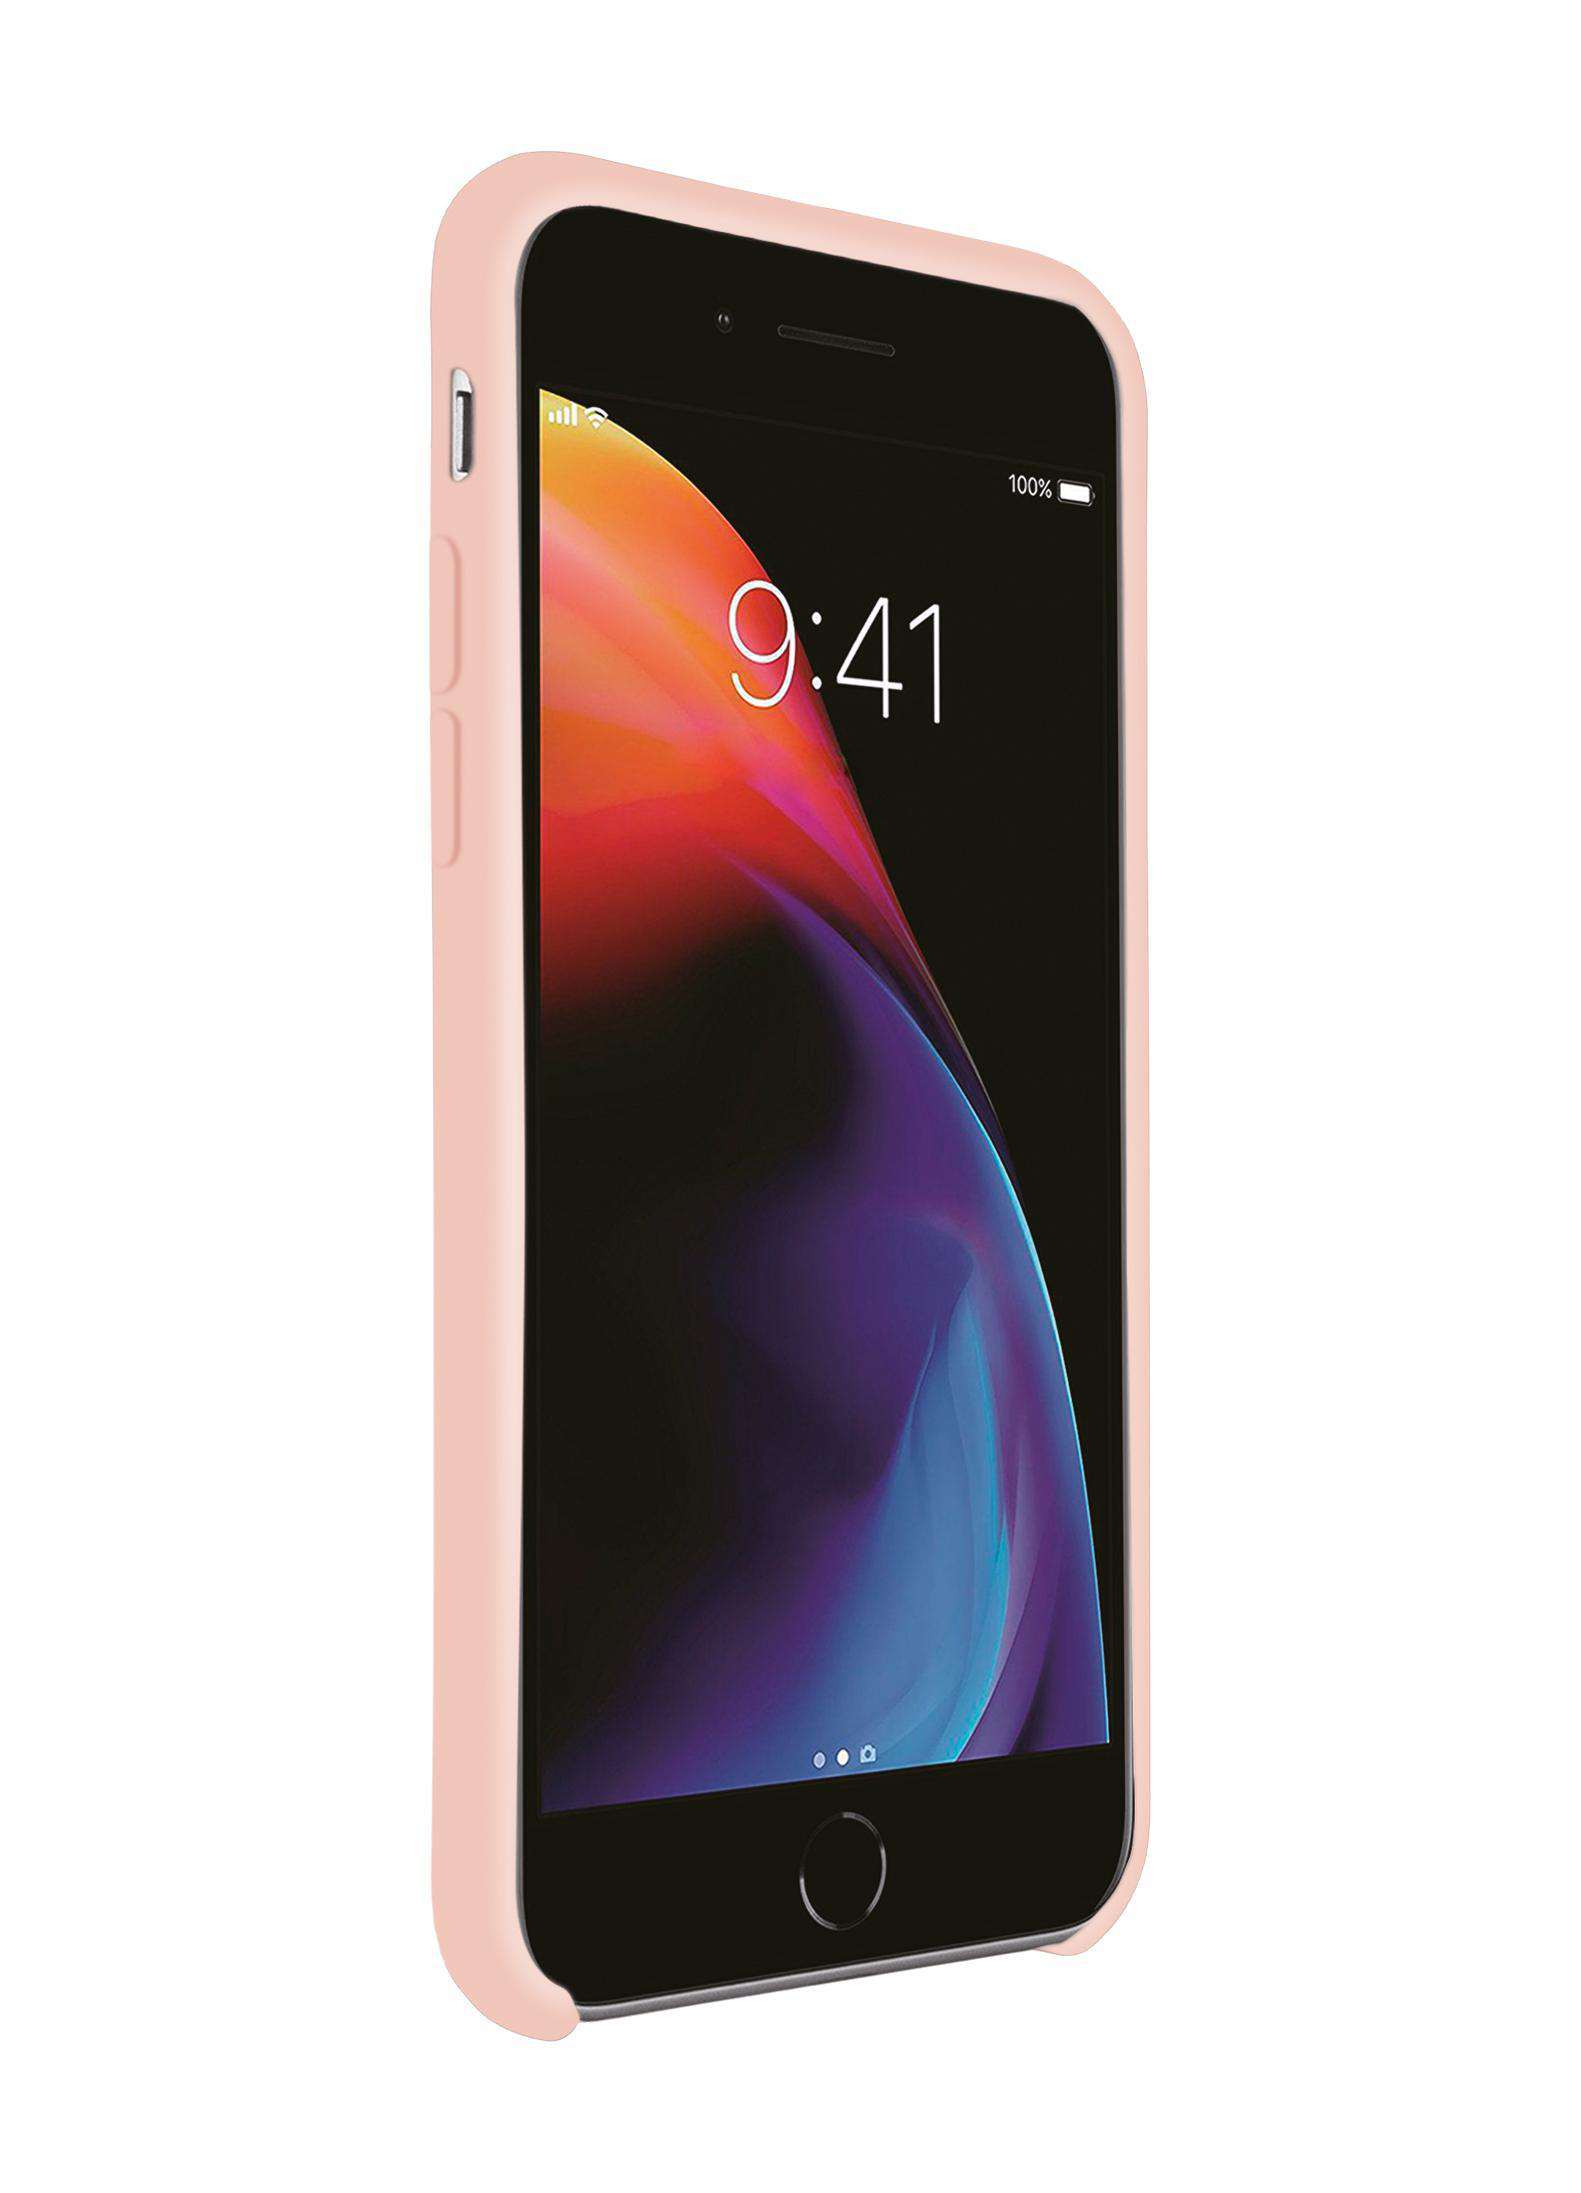 Hype Pink SE VIVANCO sand Cover, Backcover, (2020), Apple, iPhone